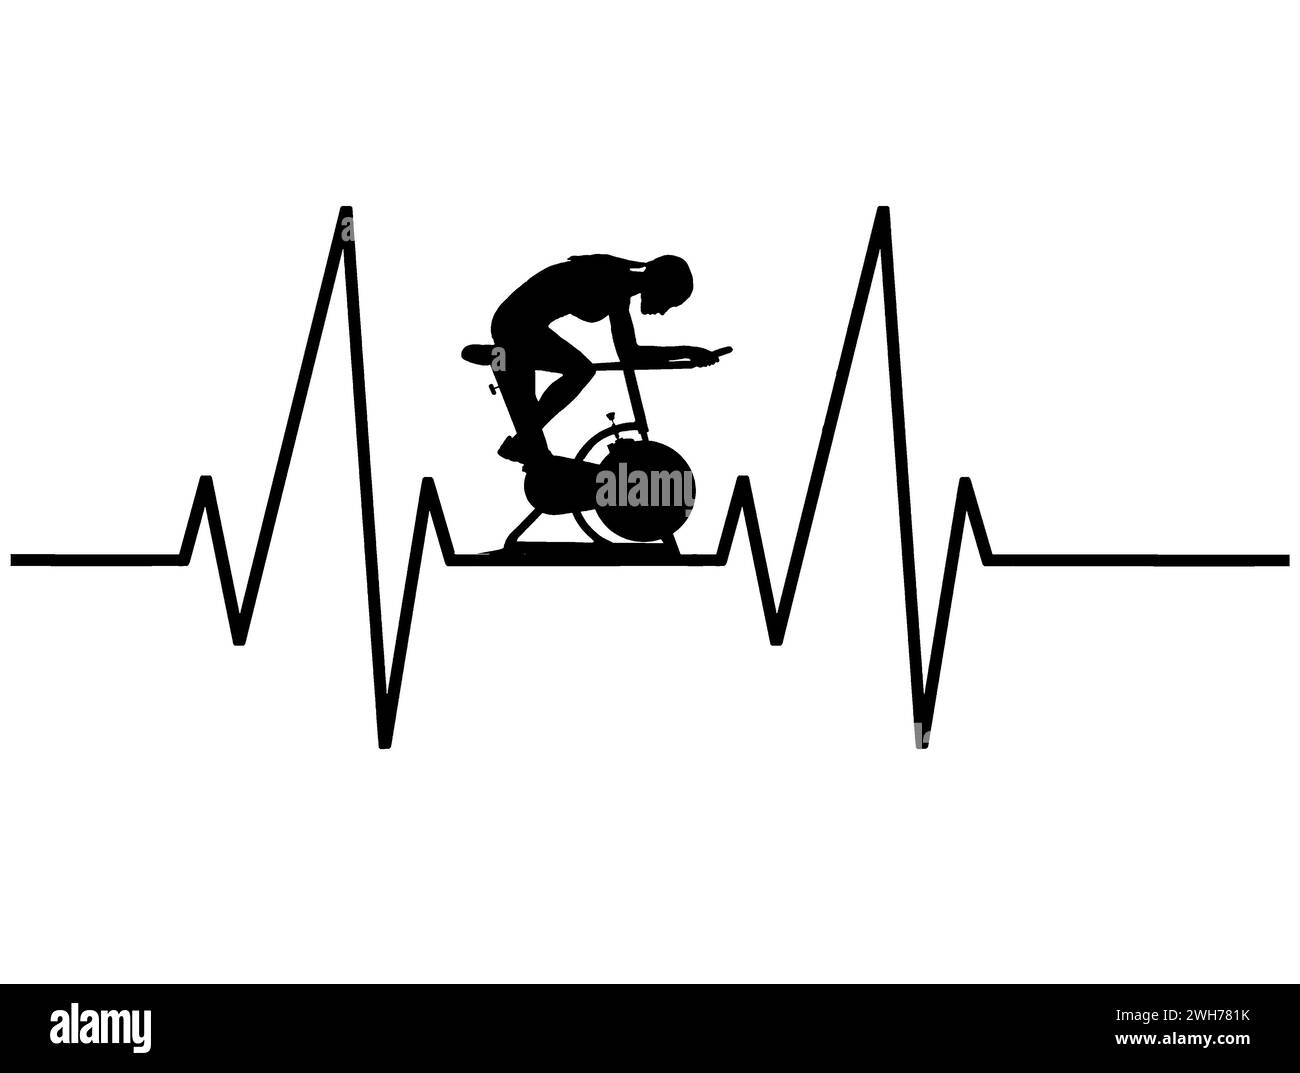 A woman on a stationary bike at the gym works out on a background of an EKG chart in this illustration about health and heart health. Stock Photo